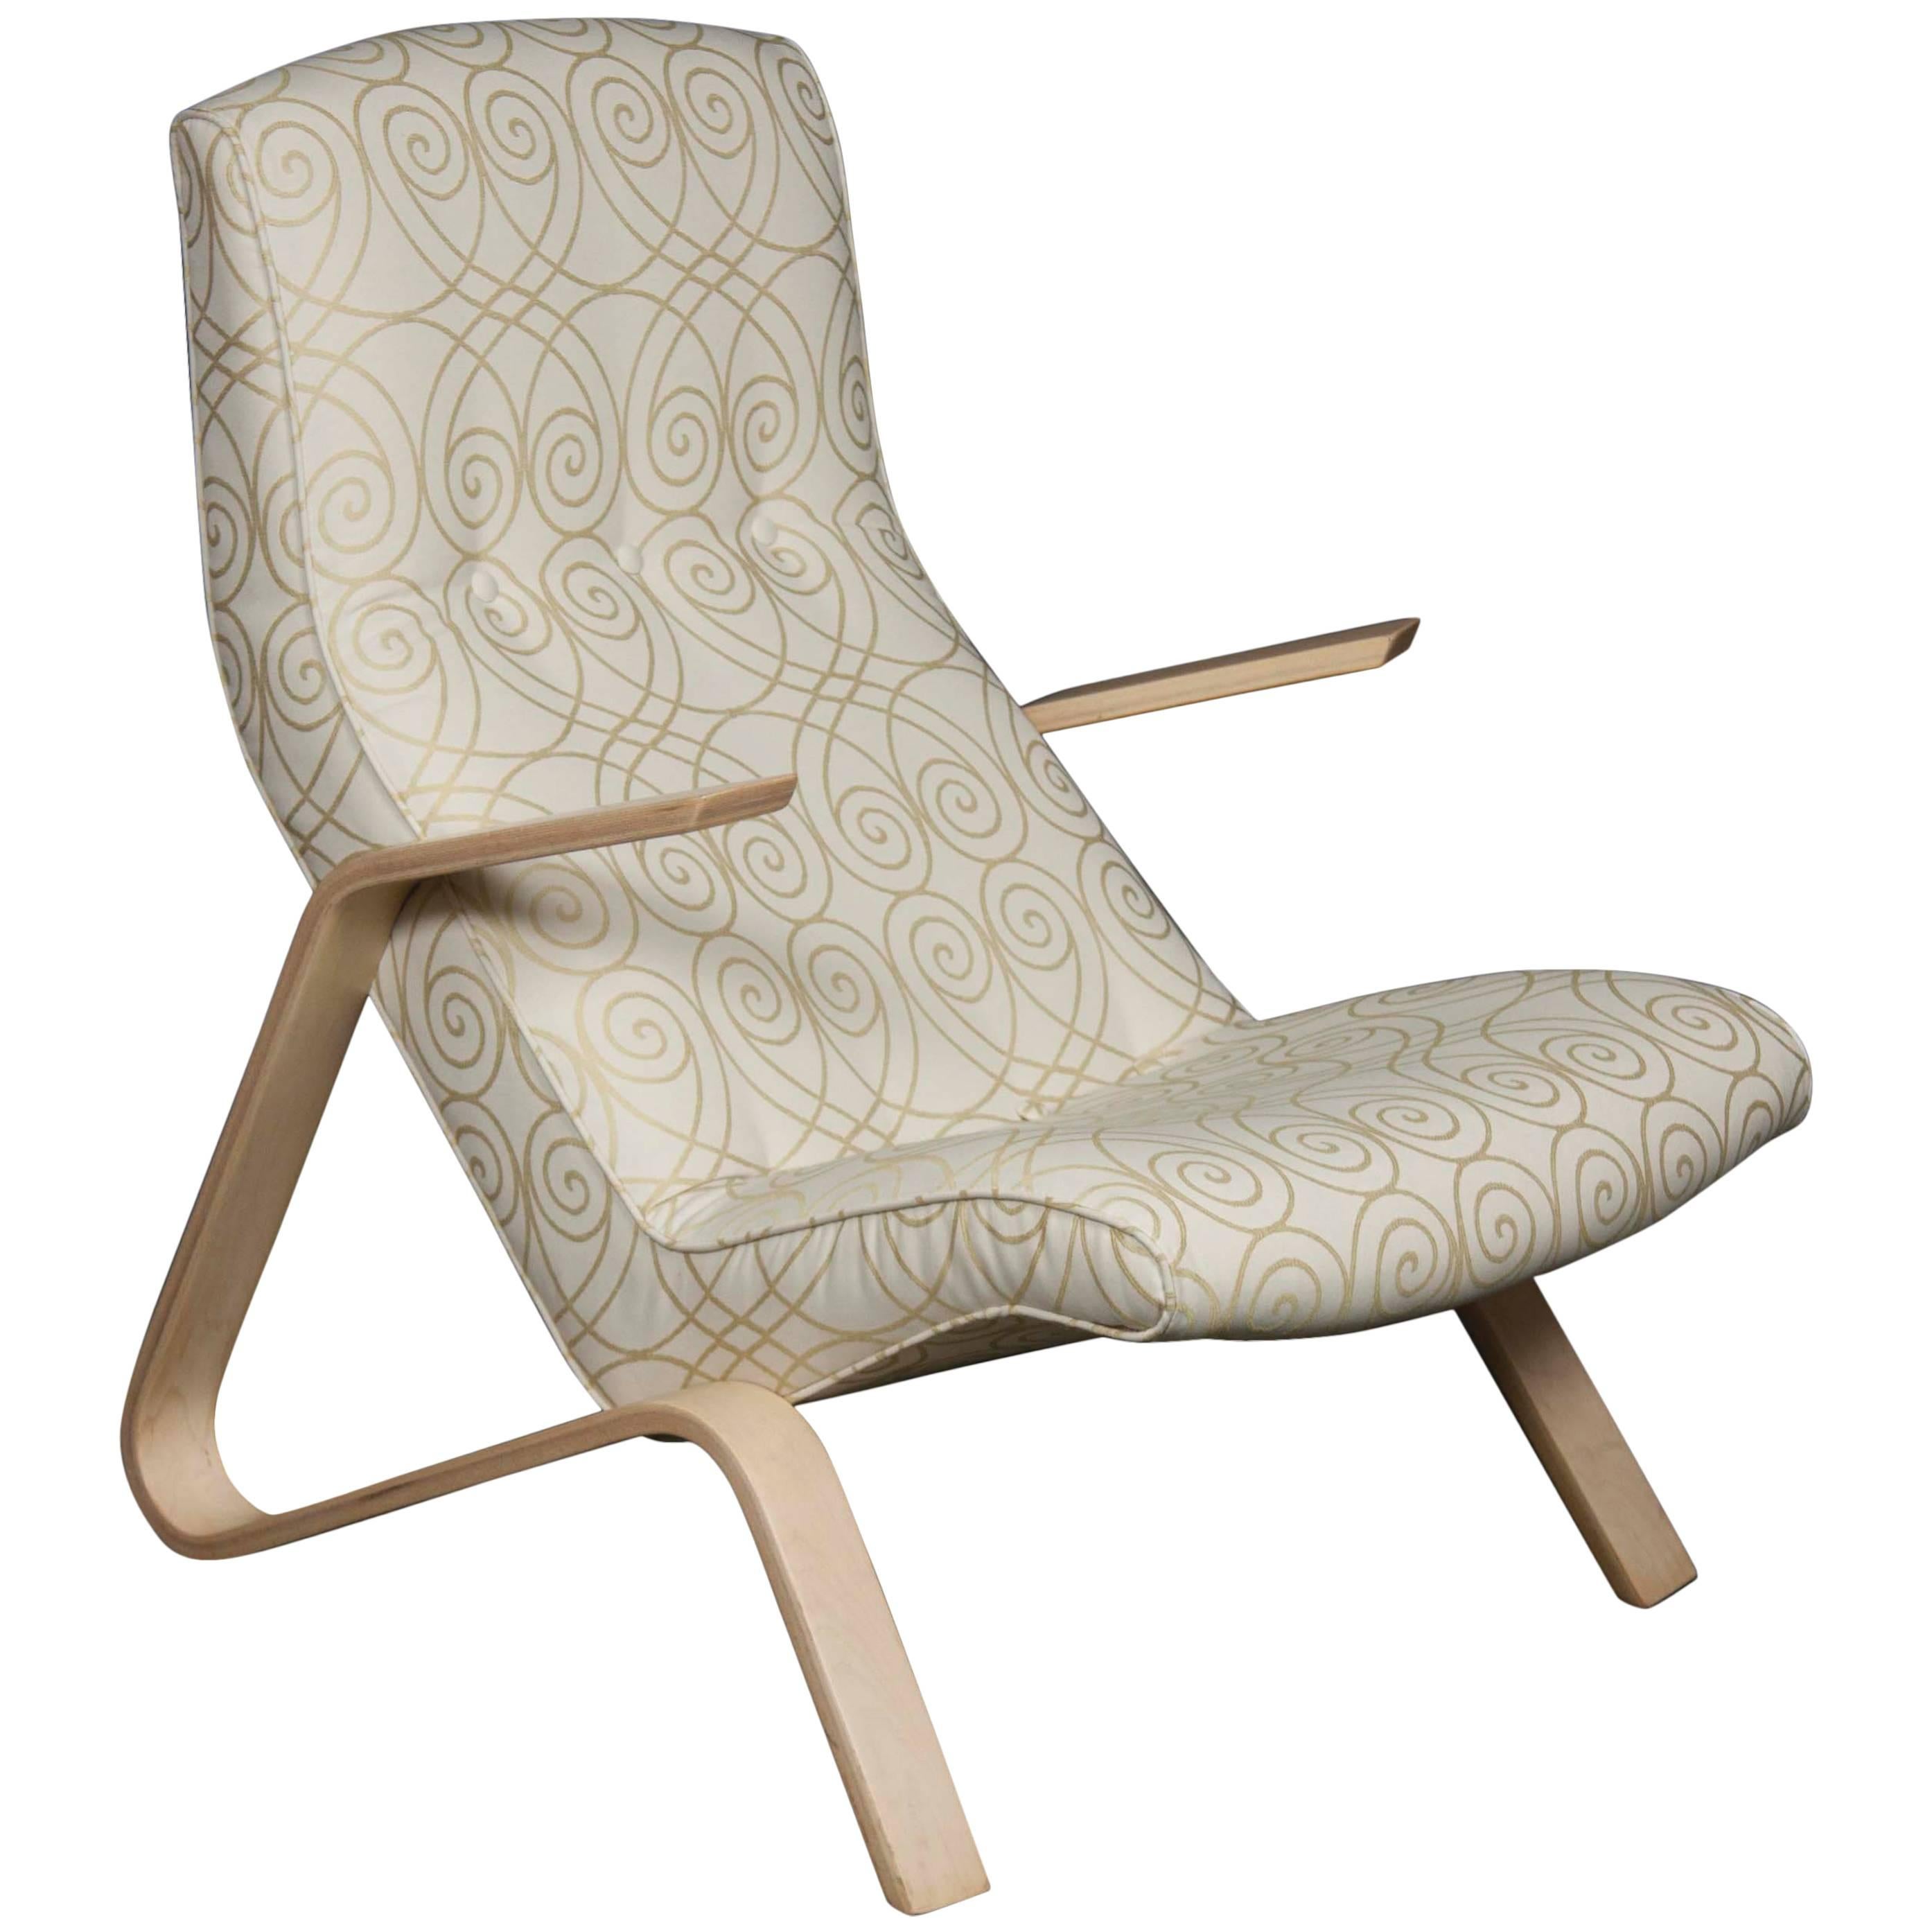 Grasshopper Chair in the Style of Eero Saarinen for Knoll